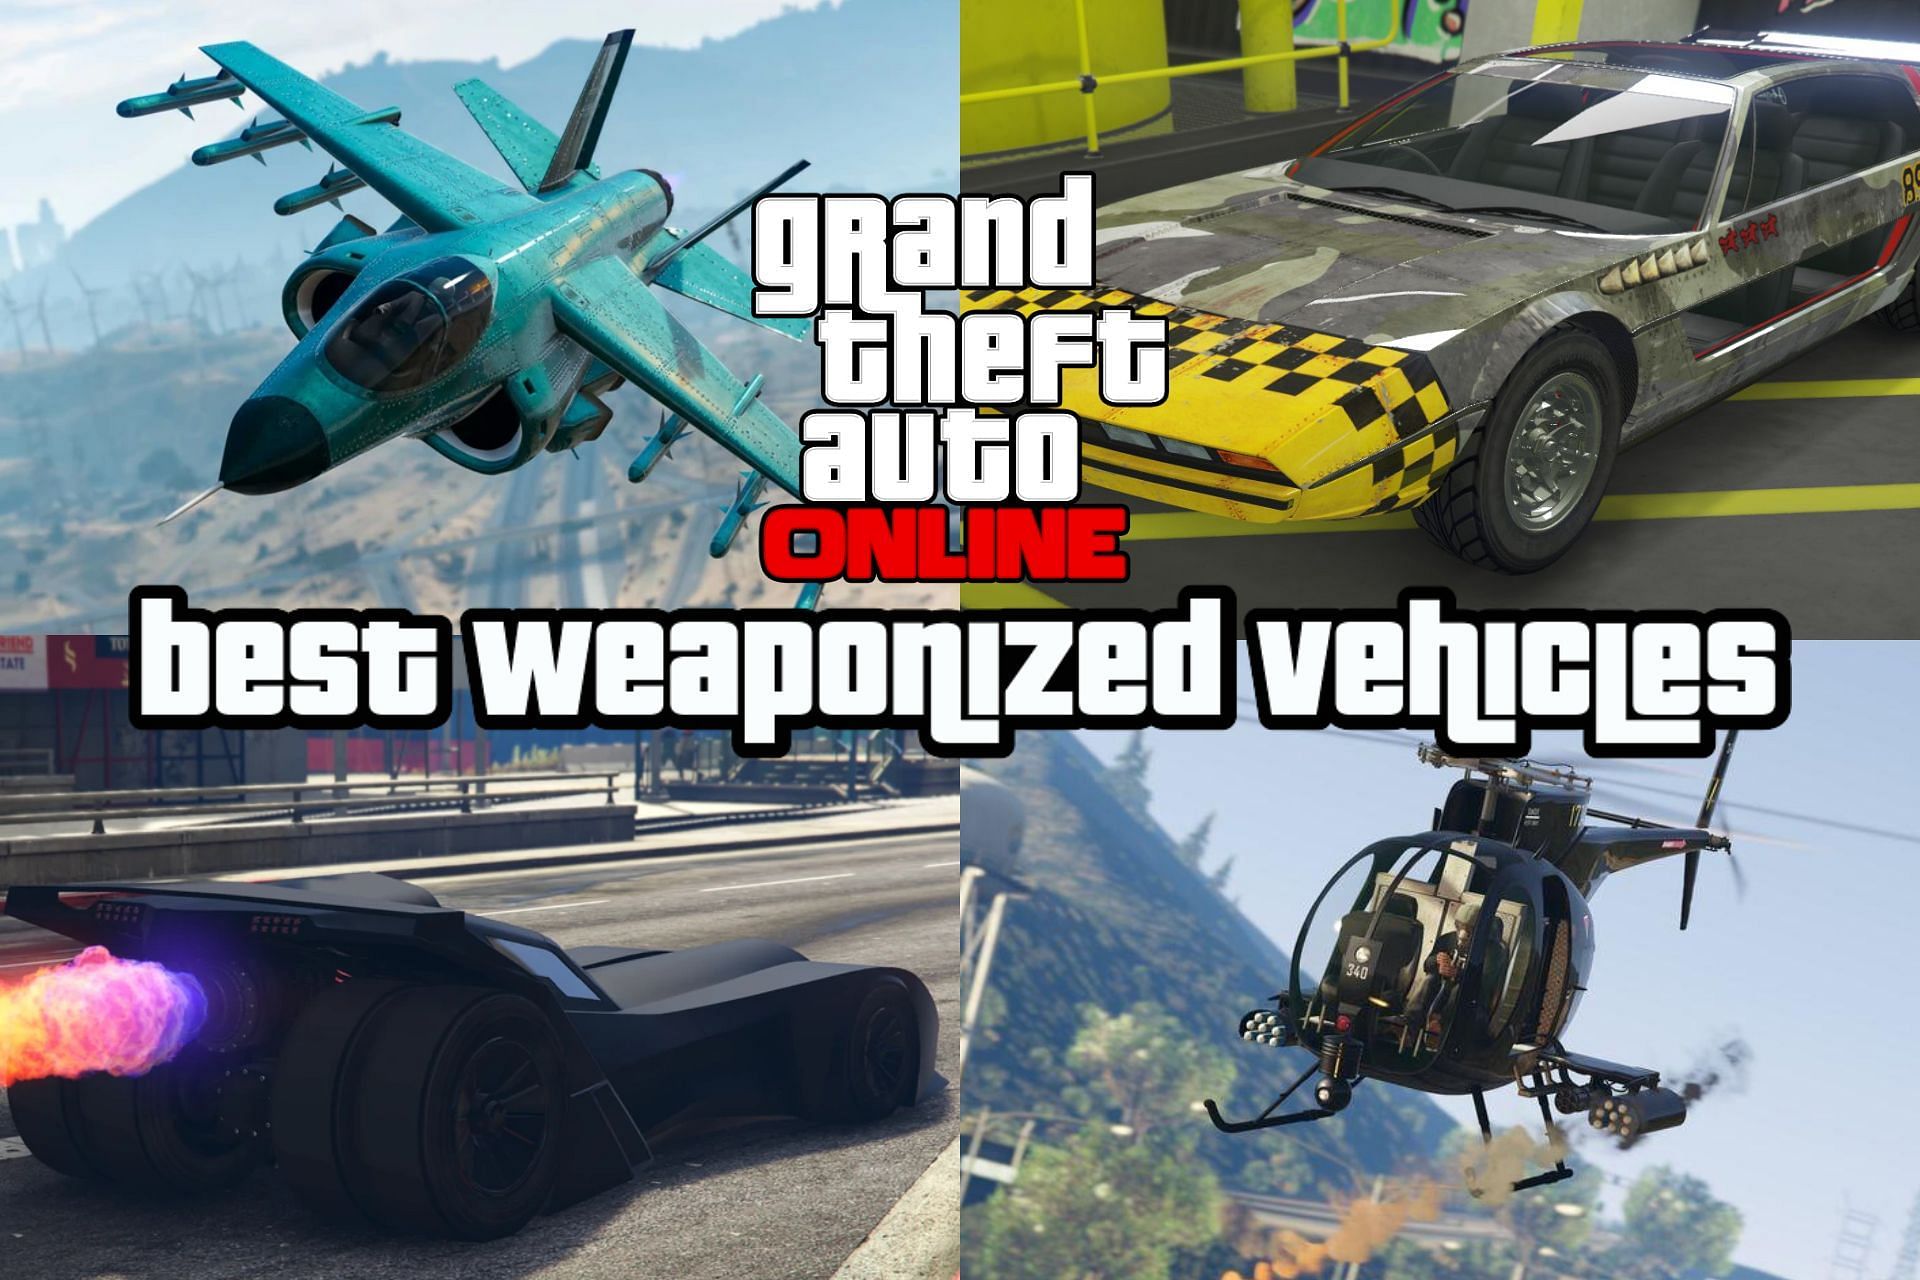 All about that gta 5 launcher фото 66